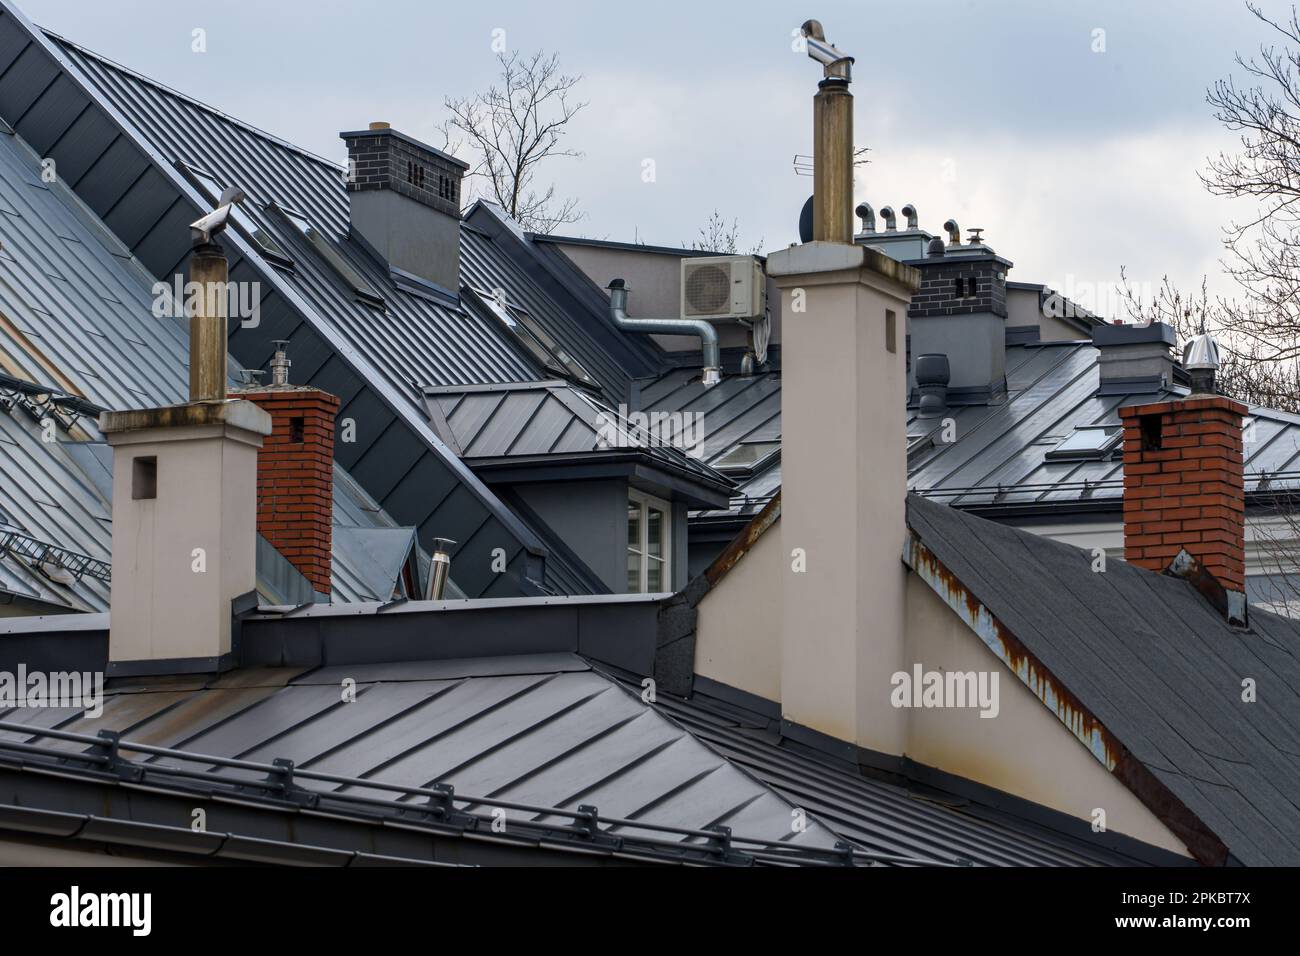 Roofs of tenement houses covered with sheet metal, gray metal roof, chimneys Stock Photo